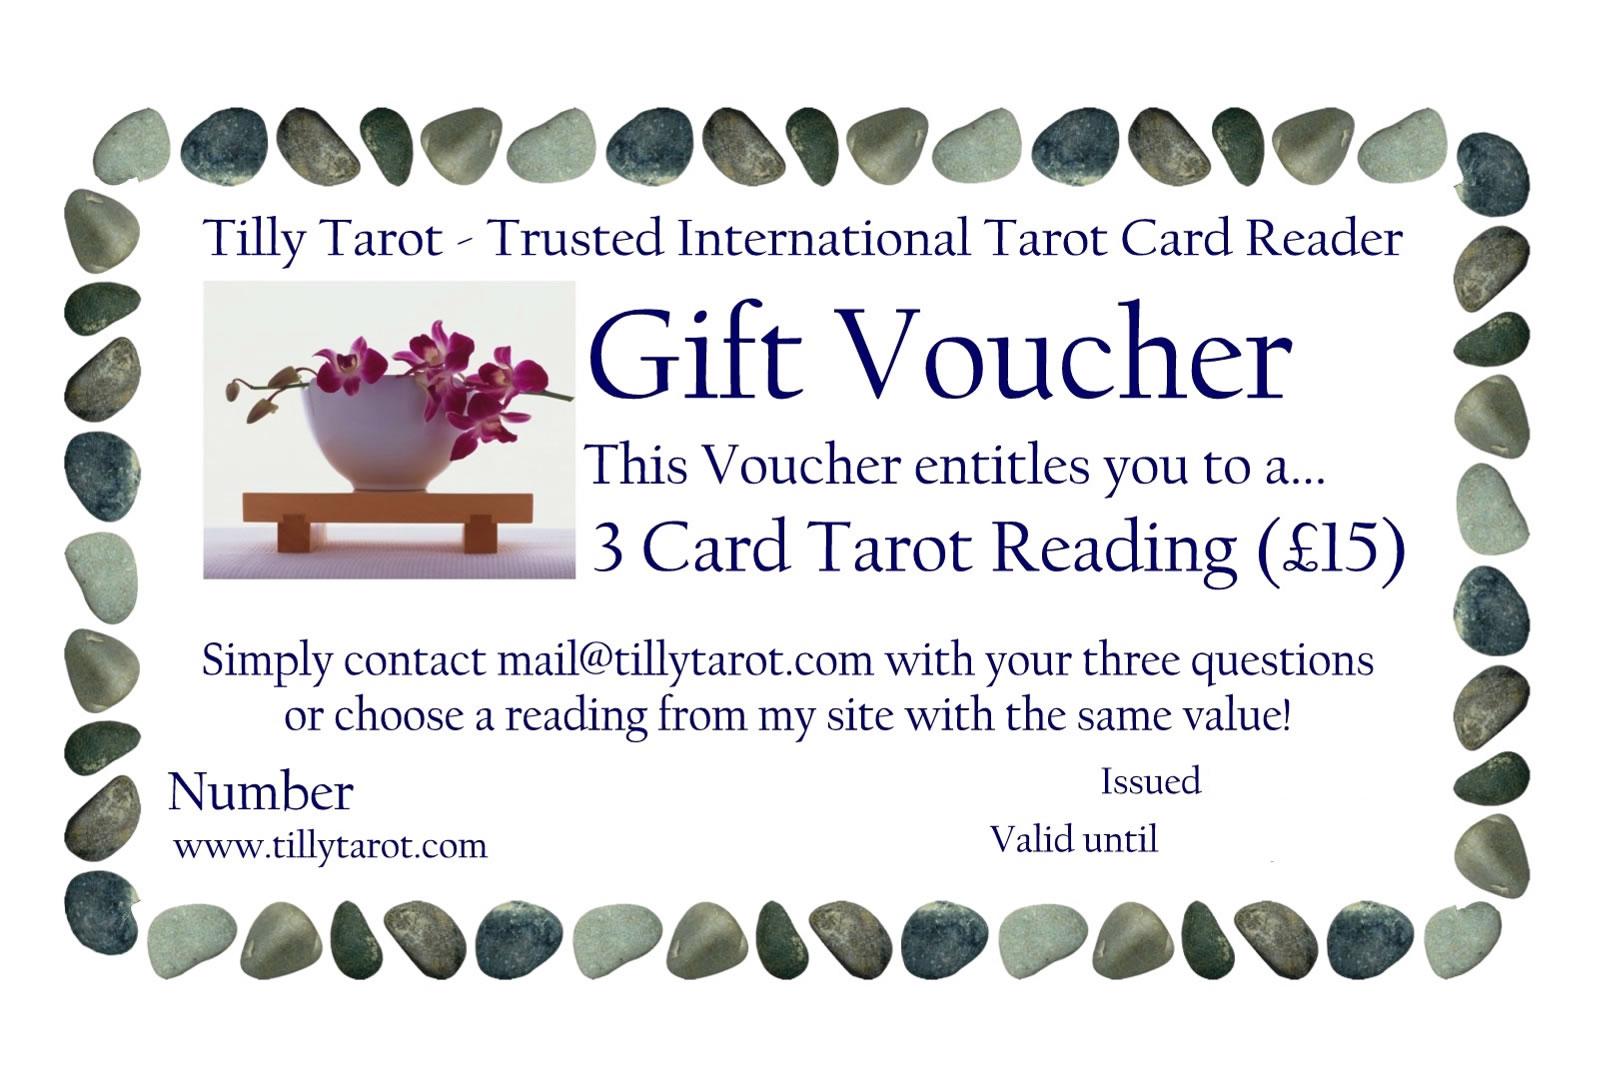 Gift Voucher is perfect for a present and will really be something ...